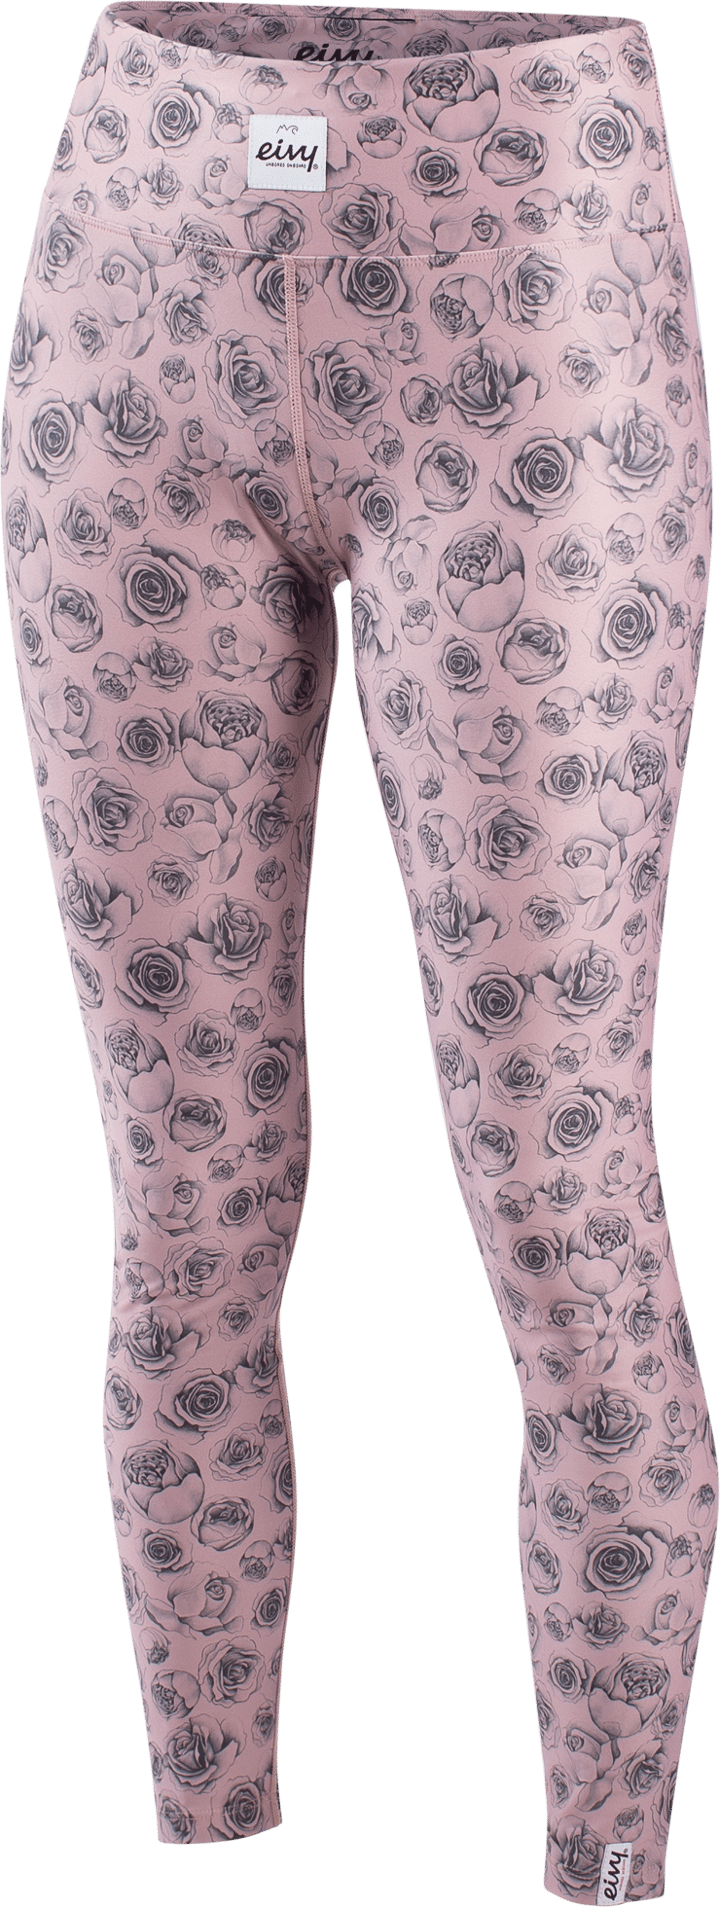 Women's Icecold Tights Charcoal Woodrose Eivy